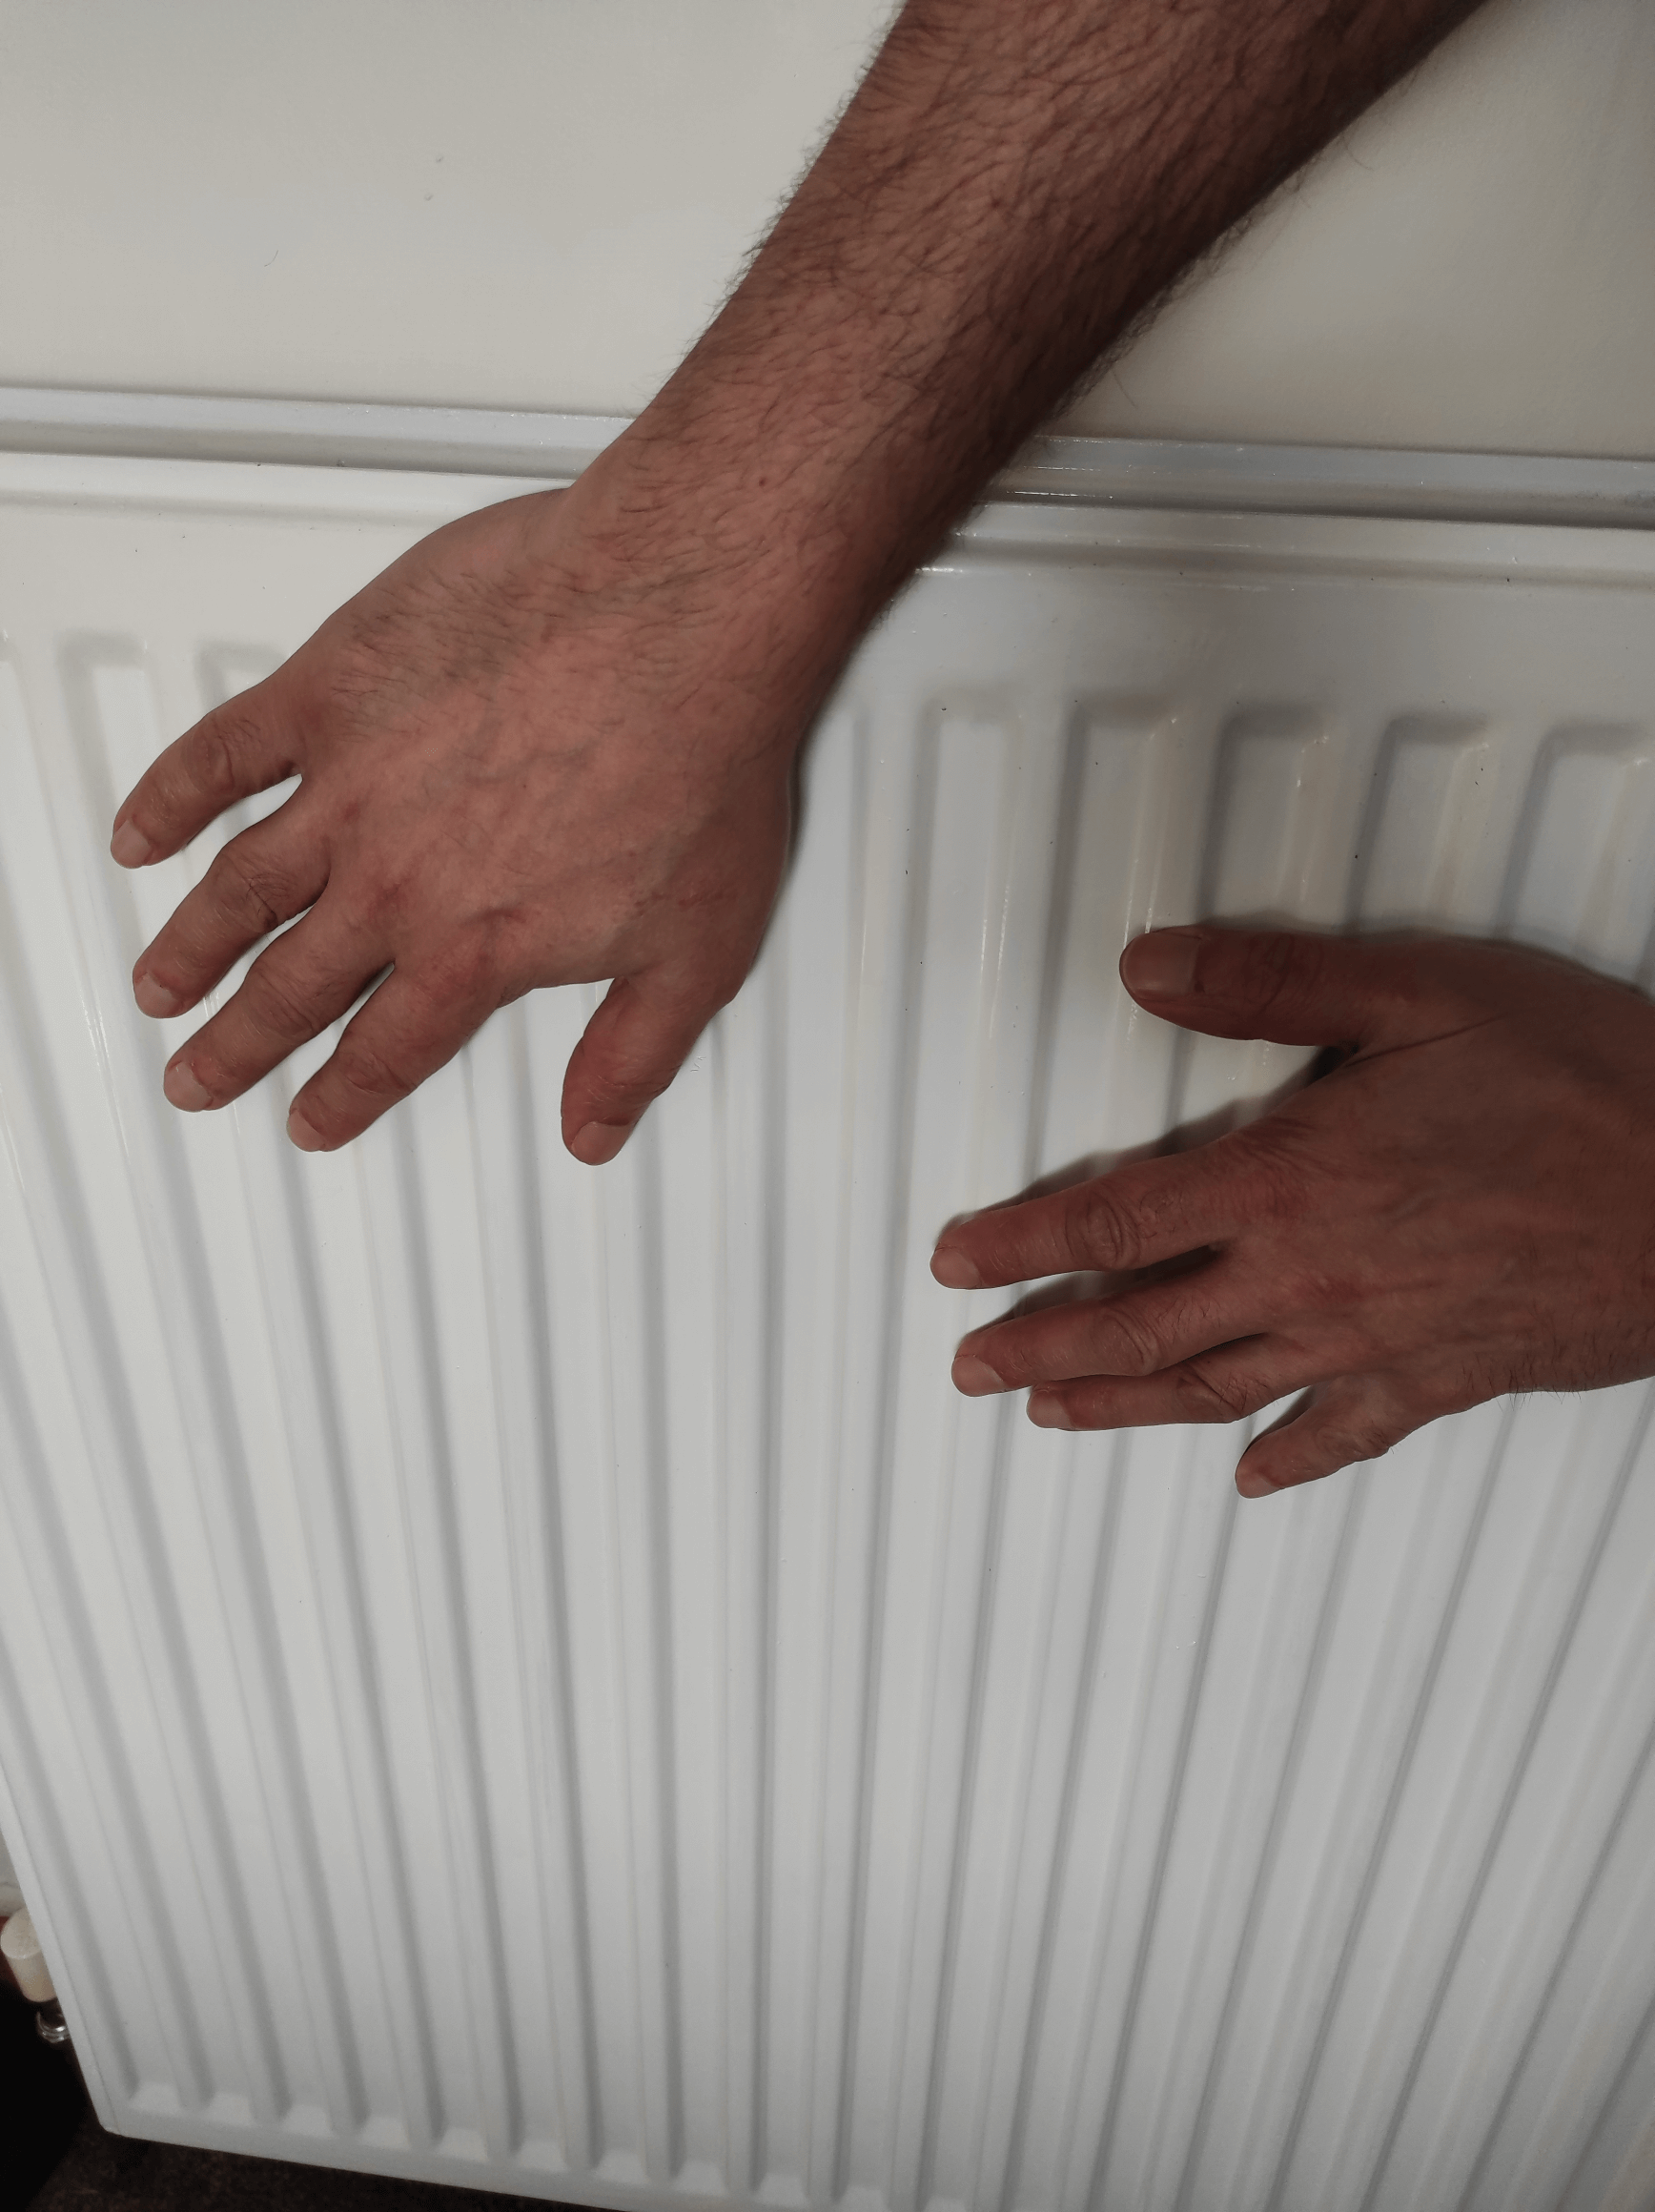 Radiator Not Heating Up? 6 Causes and Easy Fixes - Heatology